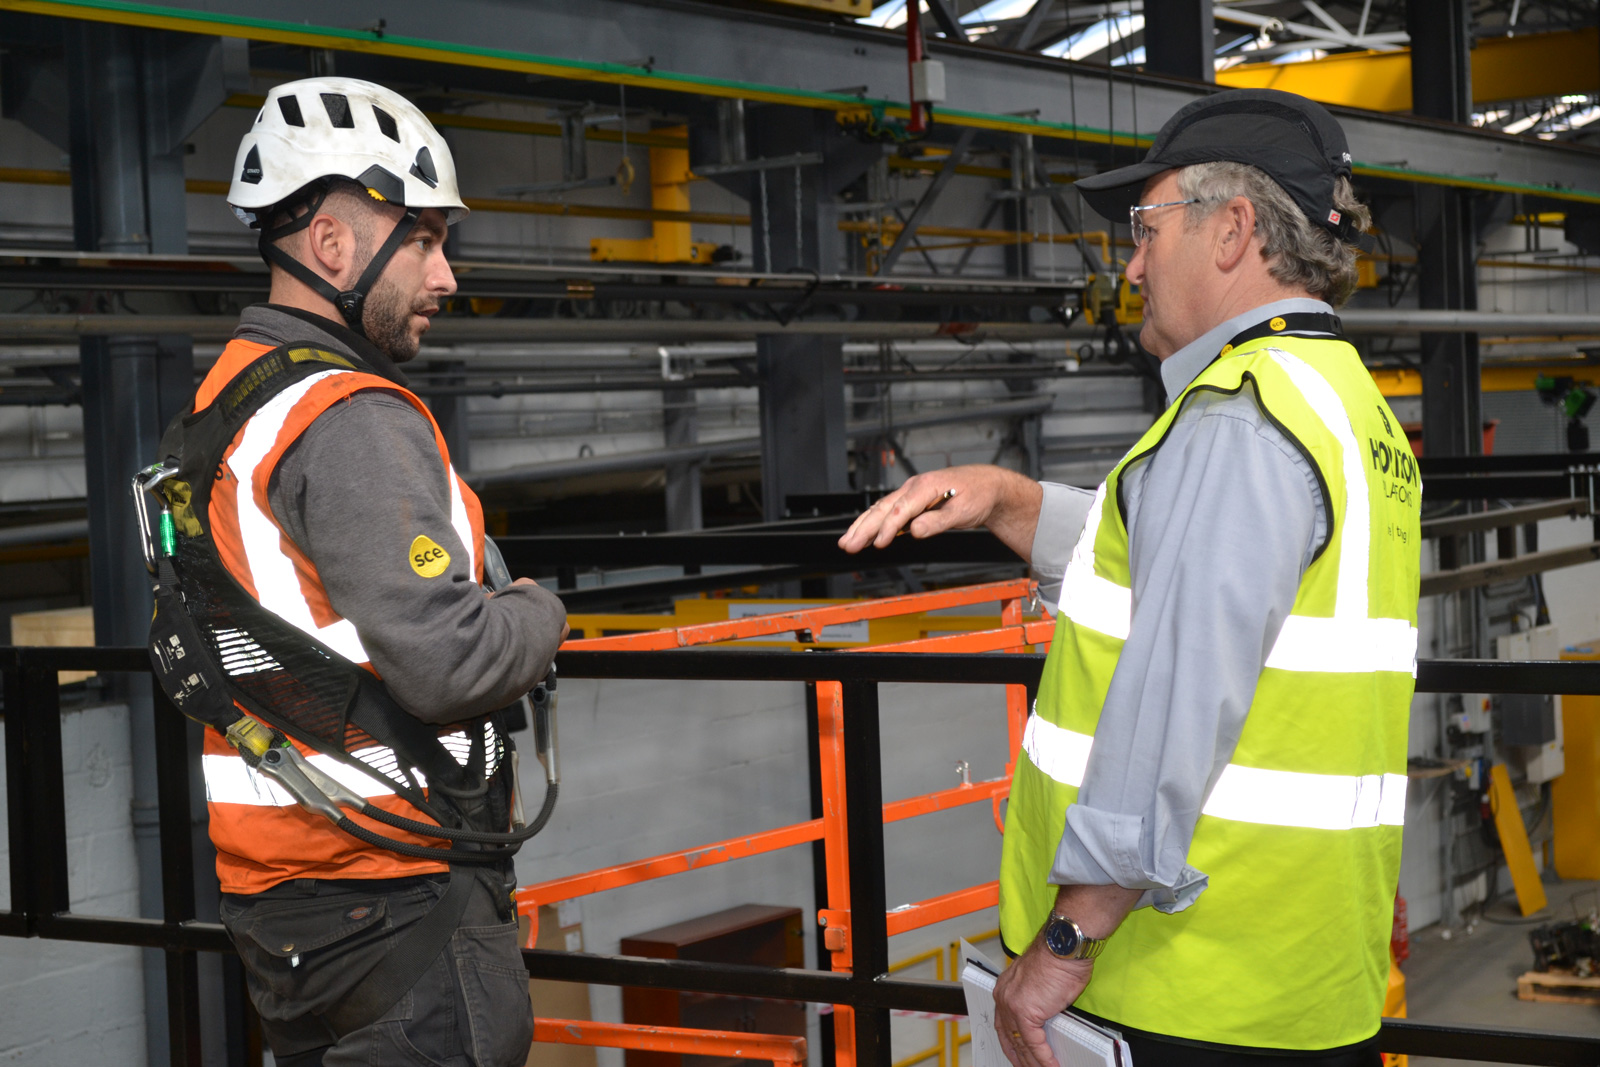 UK Providers of Training Course on IOSH Managing Safely